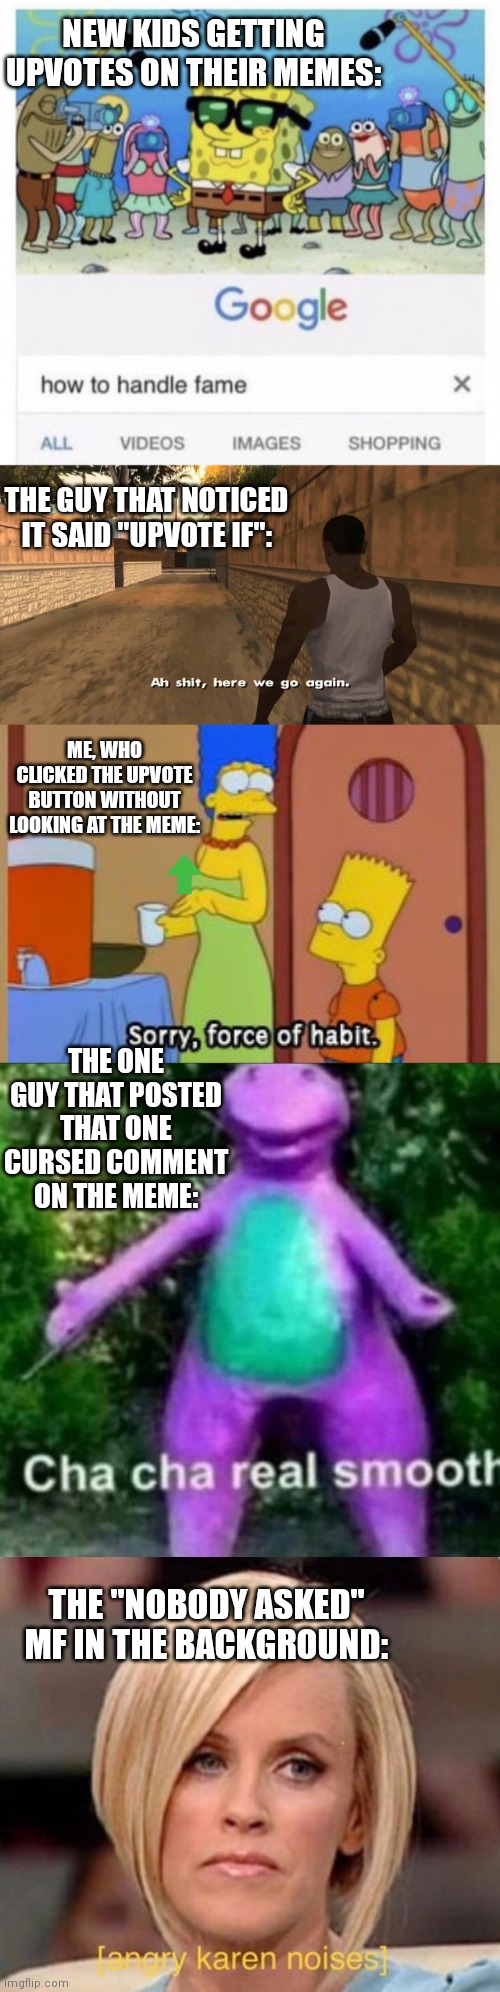 Shitty long meme. | NEW KIDS GETTING UPVOTES ON THEIR MEMES:; THE GUY THAT NOTICED IT SAID "UPVOTE IF":; ME, WHO CLICKED THE UPVOTE BUTTON WITHOUT LOOKING AT THE MEME:; THE ONE GUY THAT POSTED THAT ONE CURSED COMMENT ON THE MEME:; THE "NOBODY ASKED" MF IN THE BACKGROUND: | image tagged in how to handle fame,here we go again gta san andreas,simpsons bart no,cha cha real smooth,angry karen | made w/ Imgflip meme maker